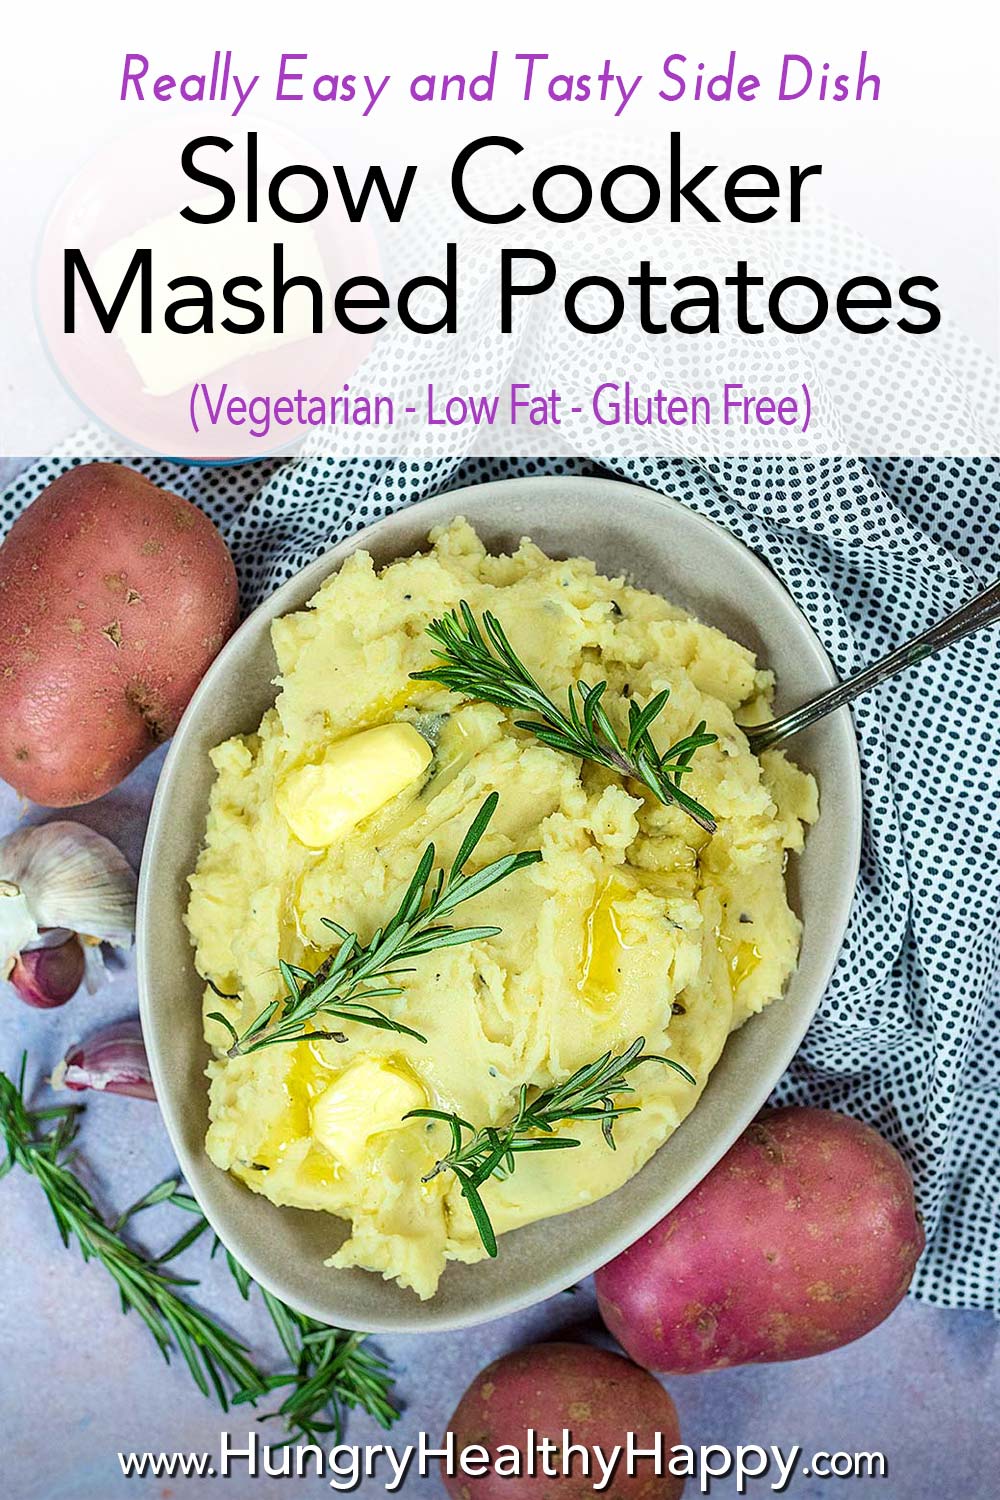 Slow Cooker Mashed Potatoes - Hungry Healthy Happy